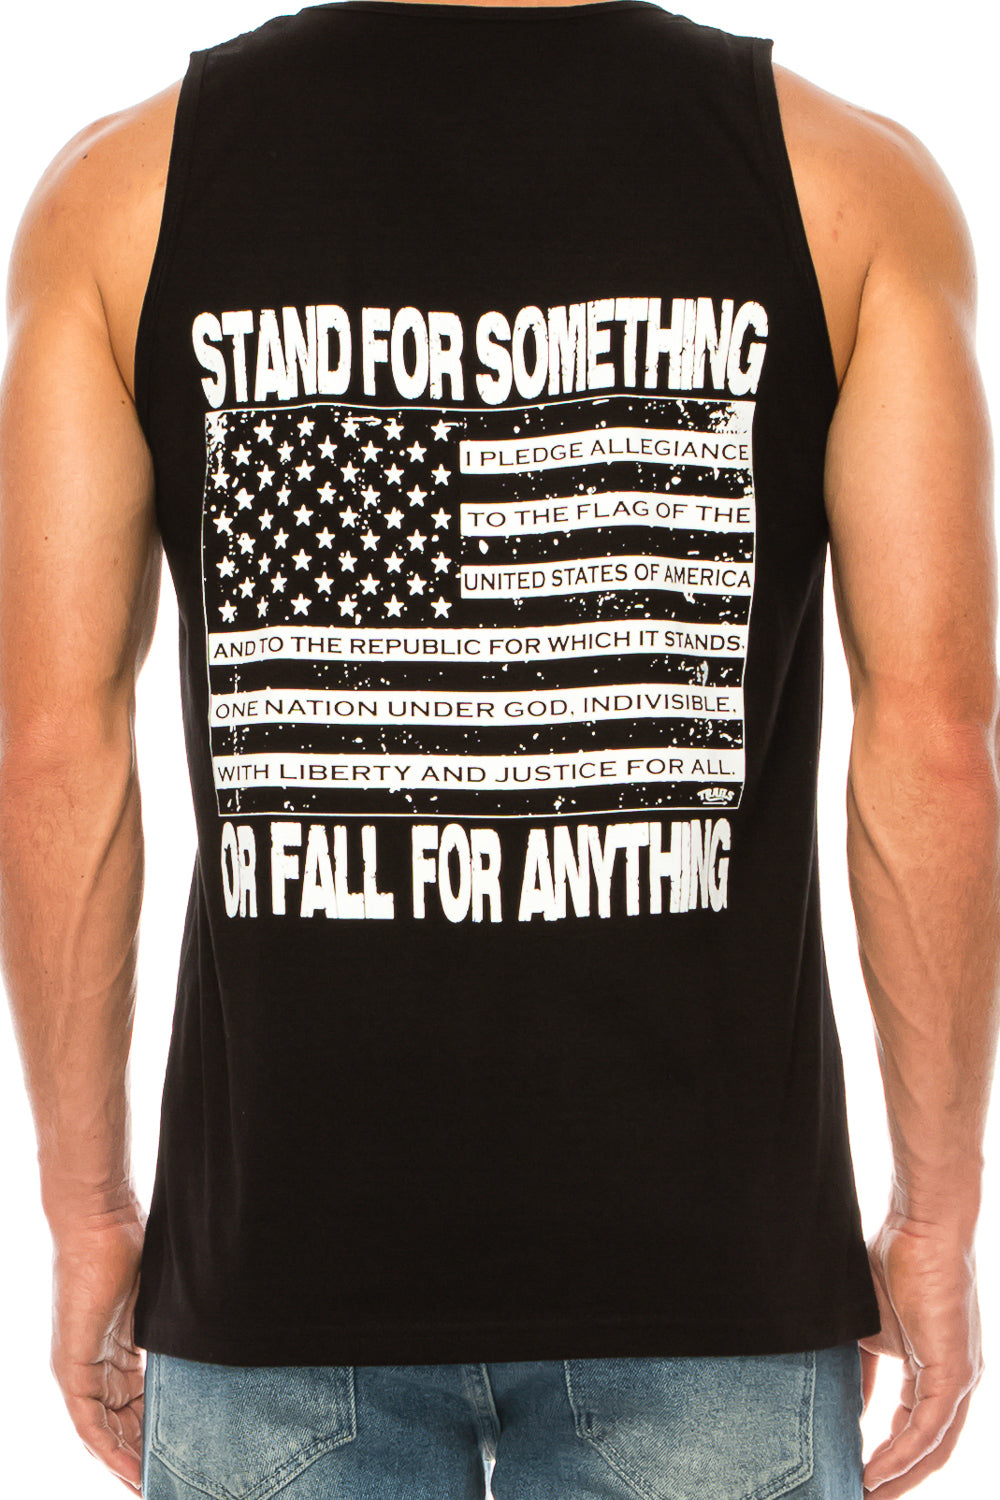 STAND FOR SOMETHING TANK TOP - Trailsclothing.com